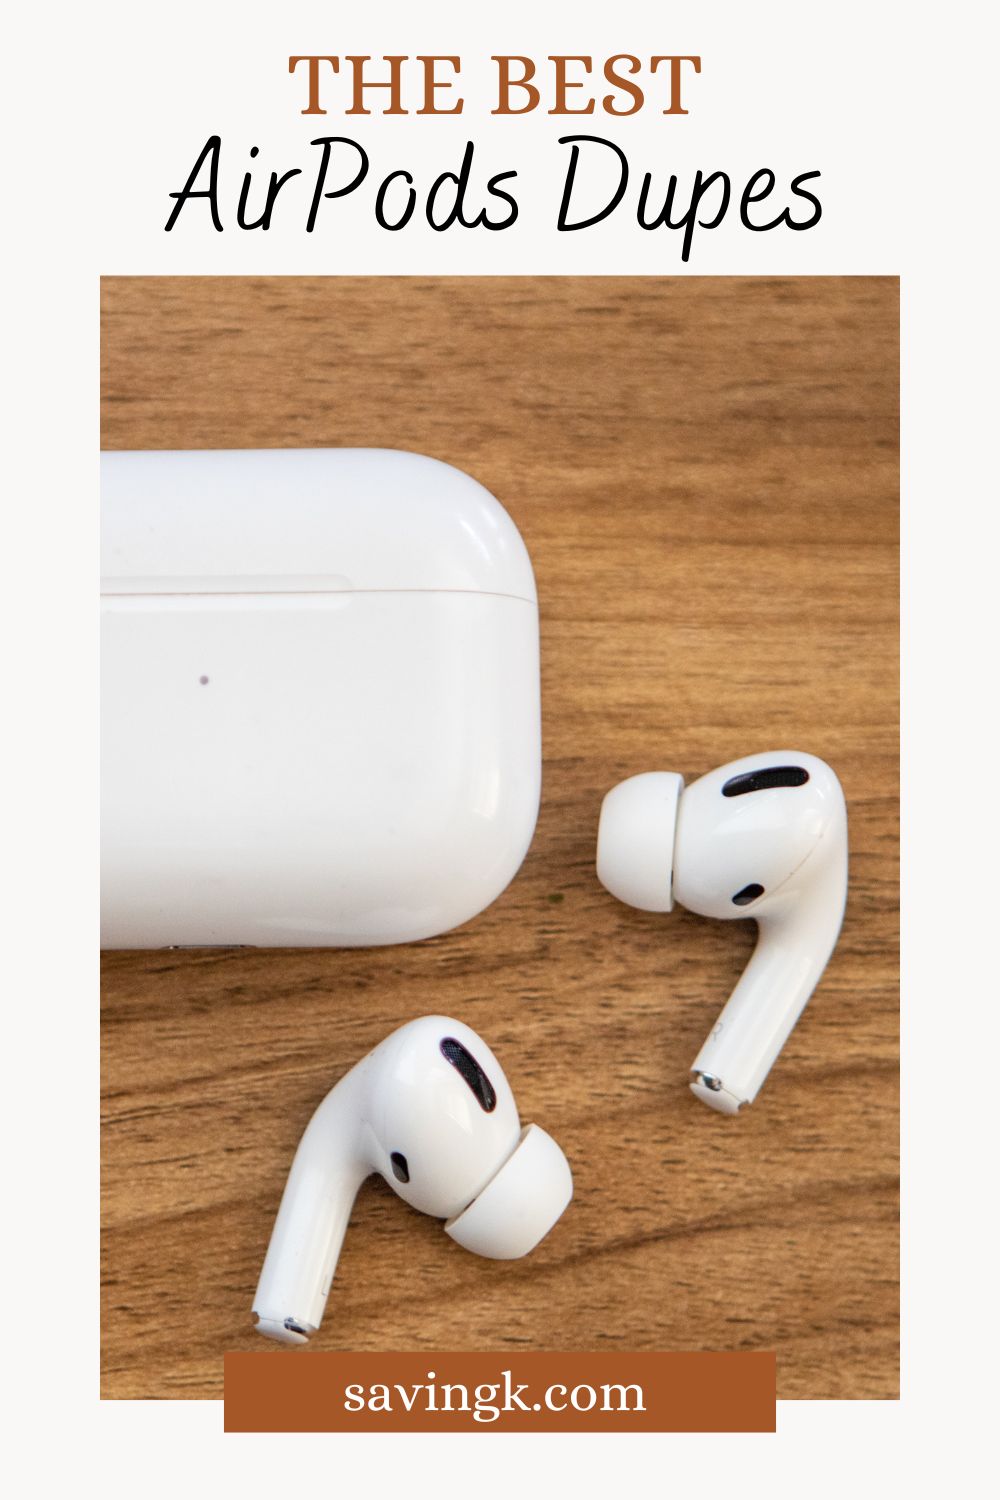 Apple AirPods Dupe